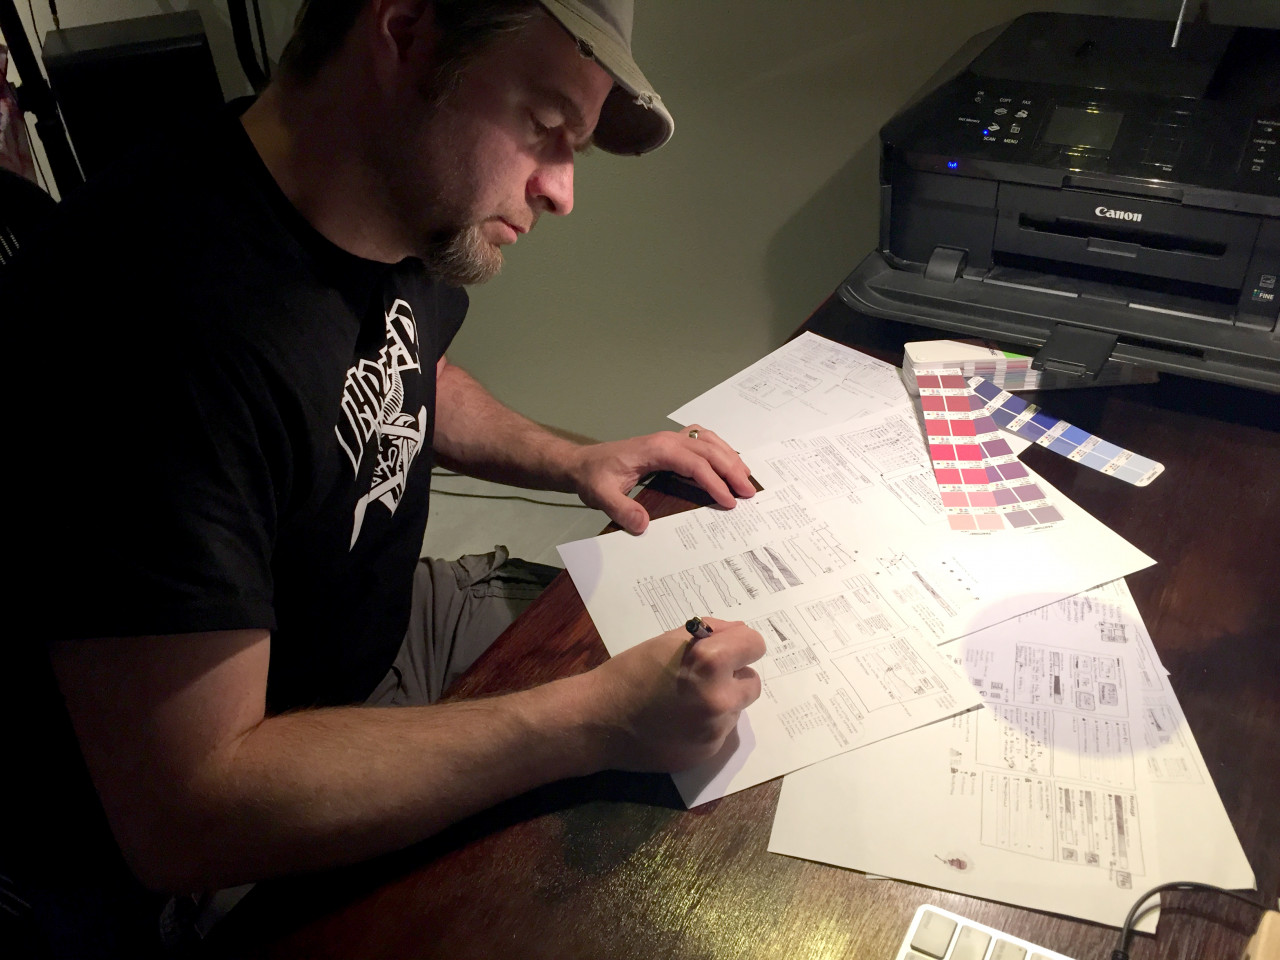 A picture of Chris at a desk, sketching with pen and paper. A fan deck of color swatches has several colors open in the background.